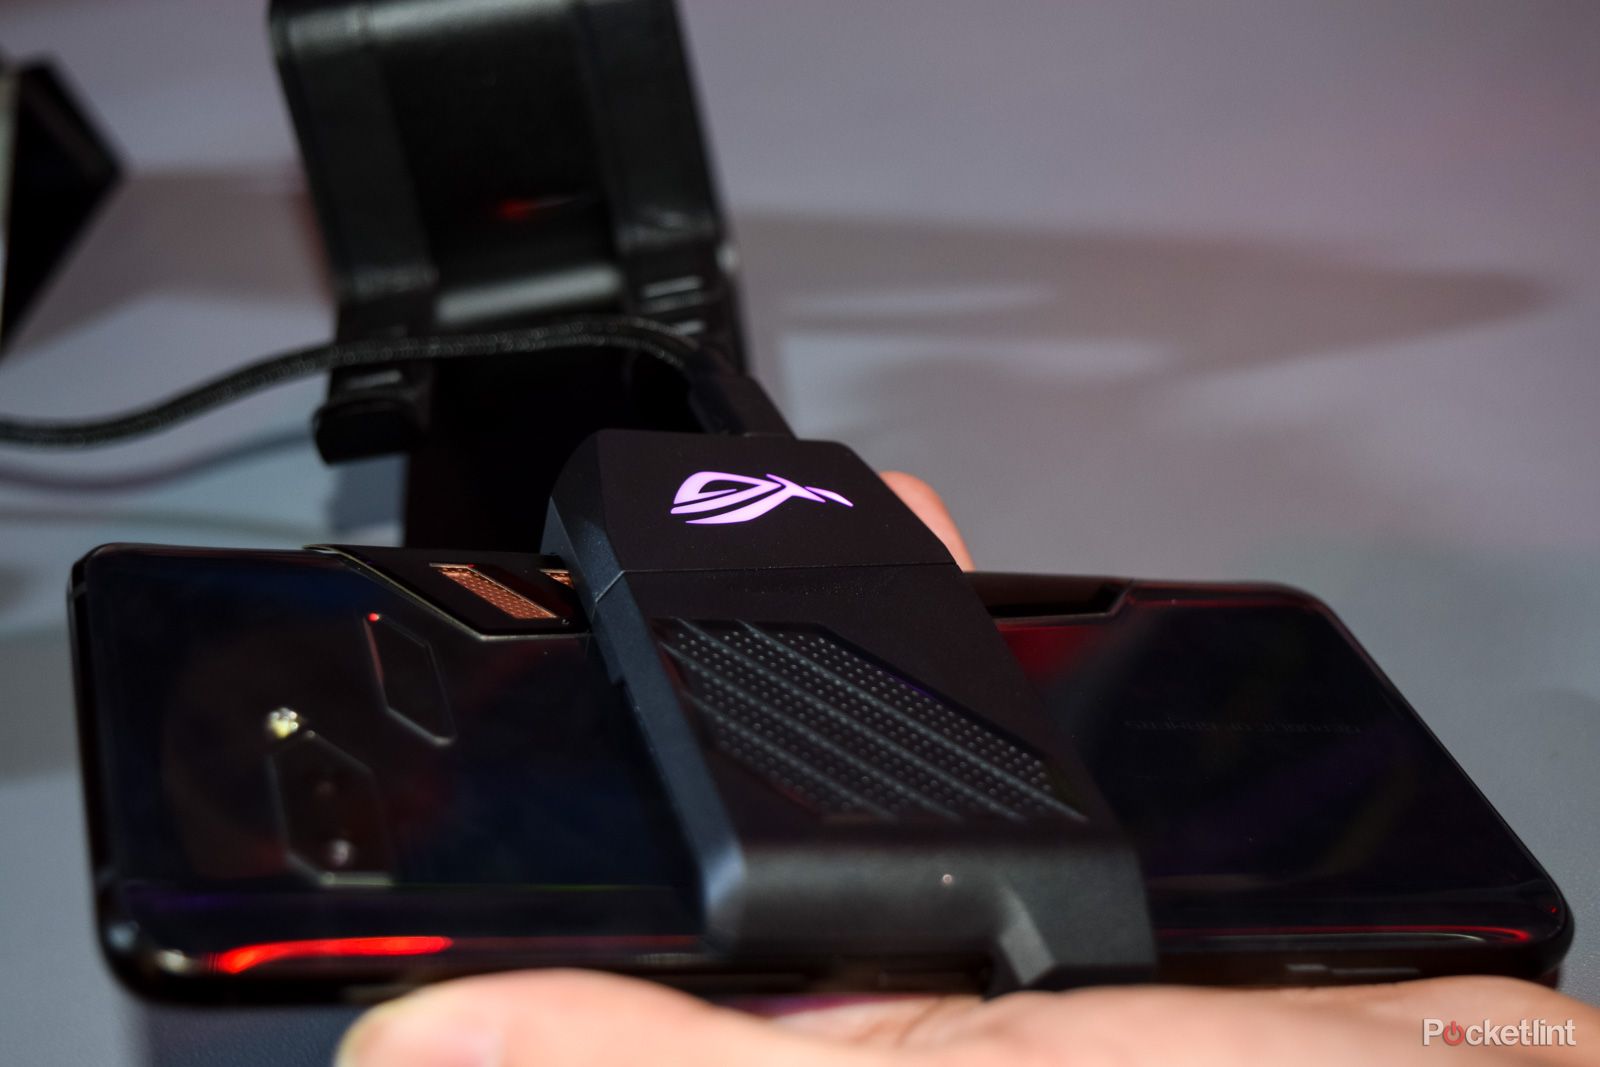 Asus Rog Phone Initial Review The Serious Flagship Smartphone For Pubg Gamers And More image 15